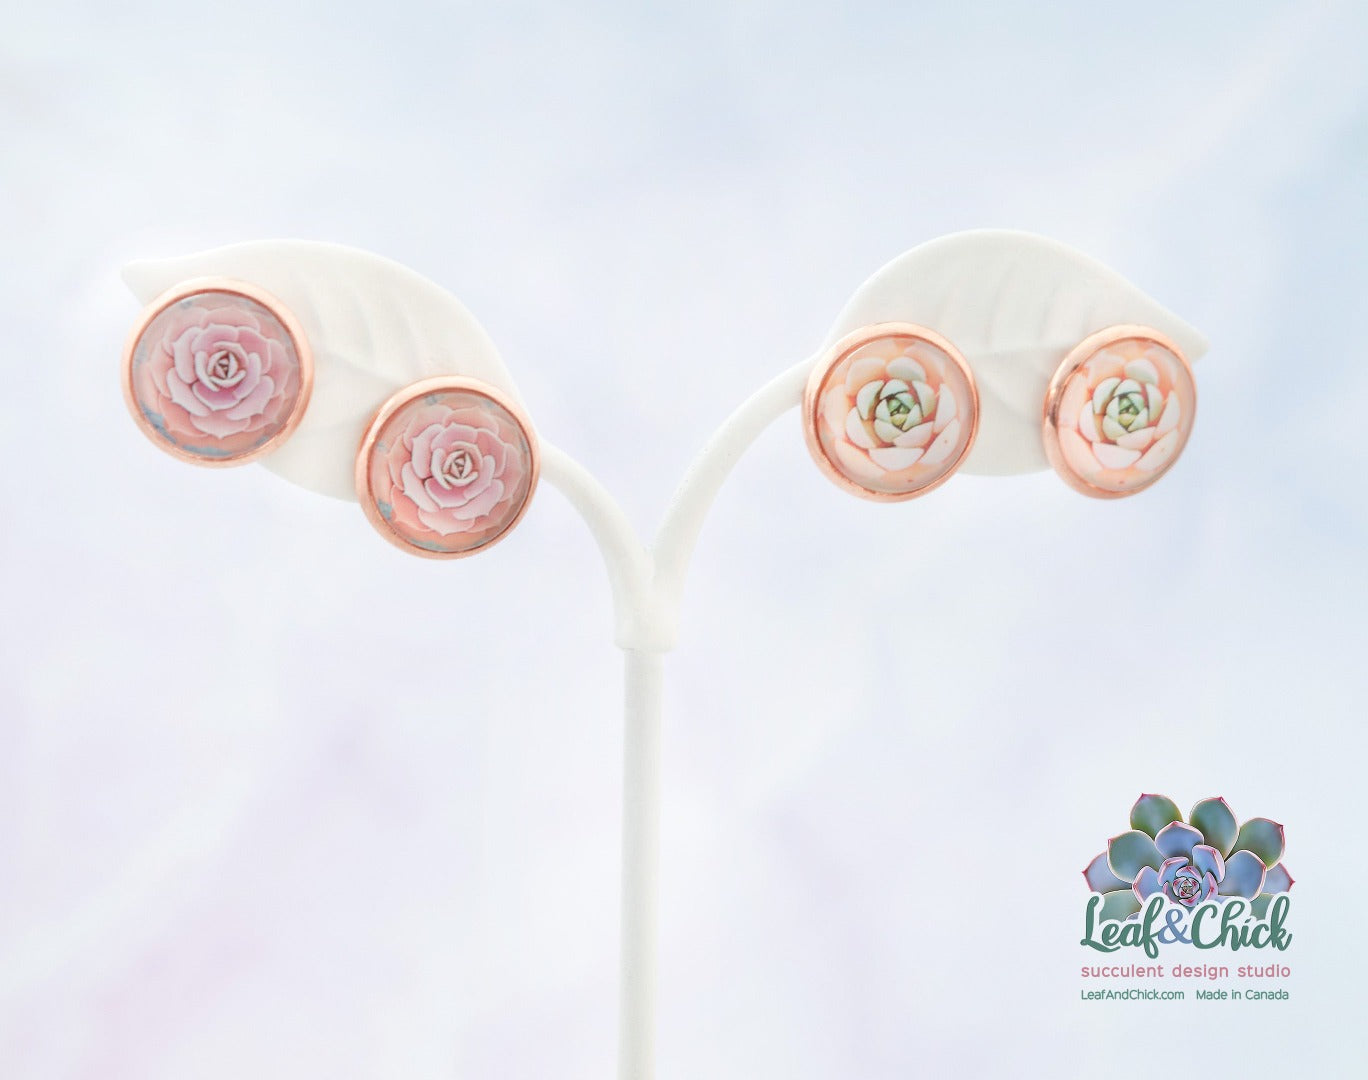 two styles of succulent art on pink stud earrings